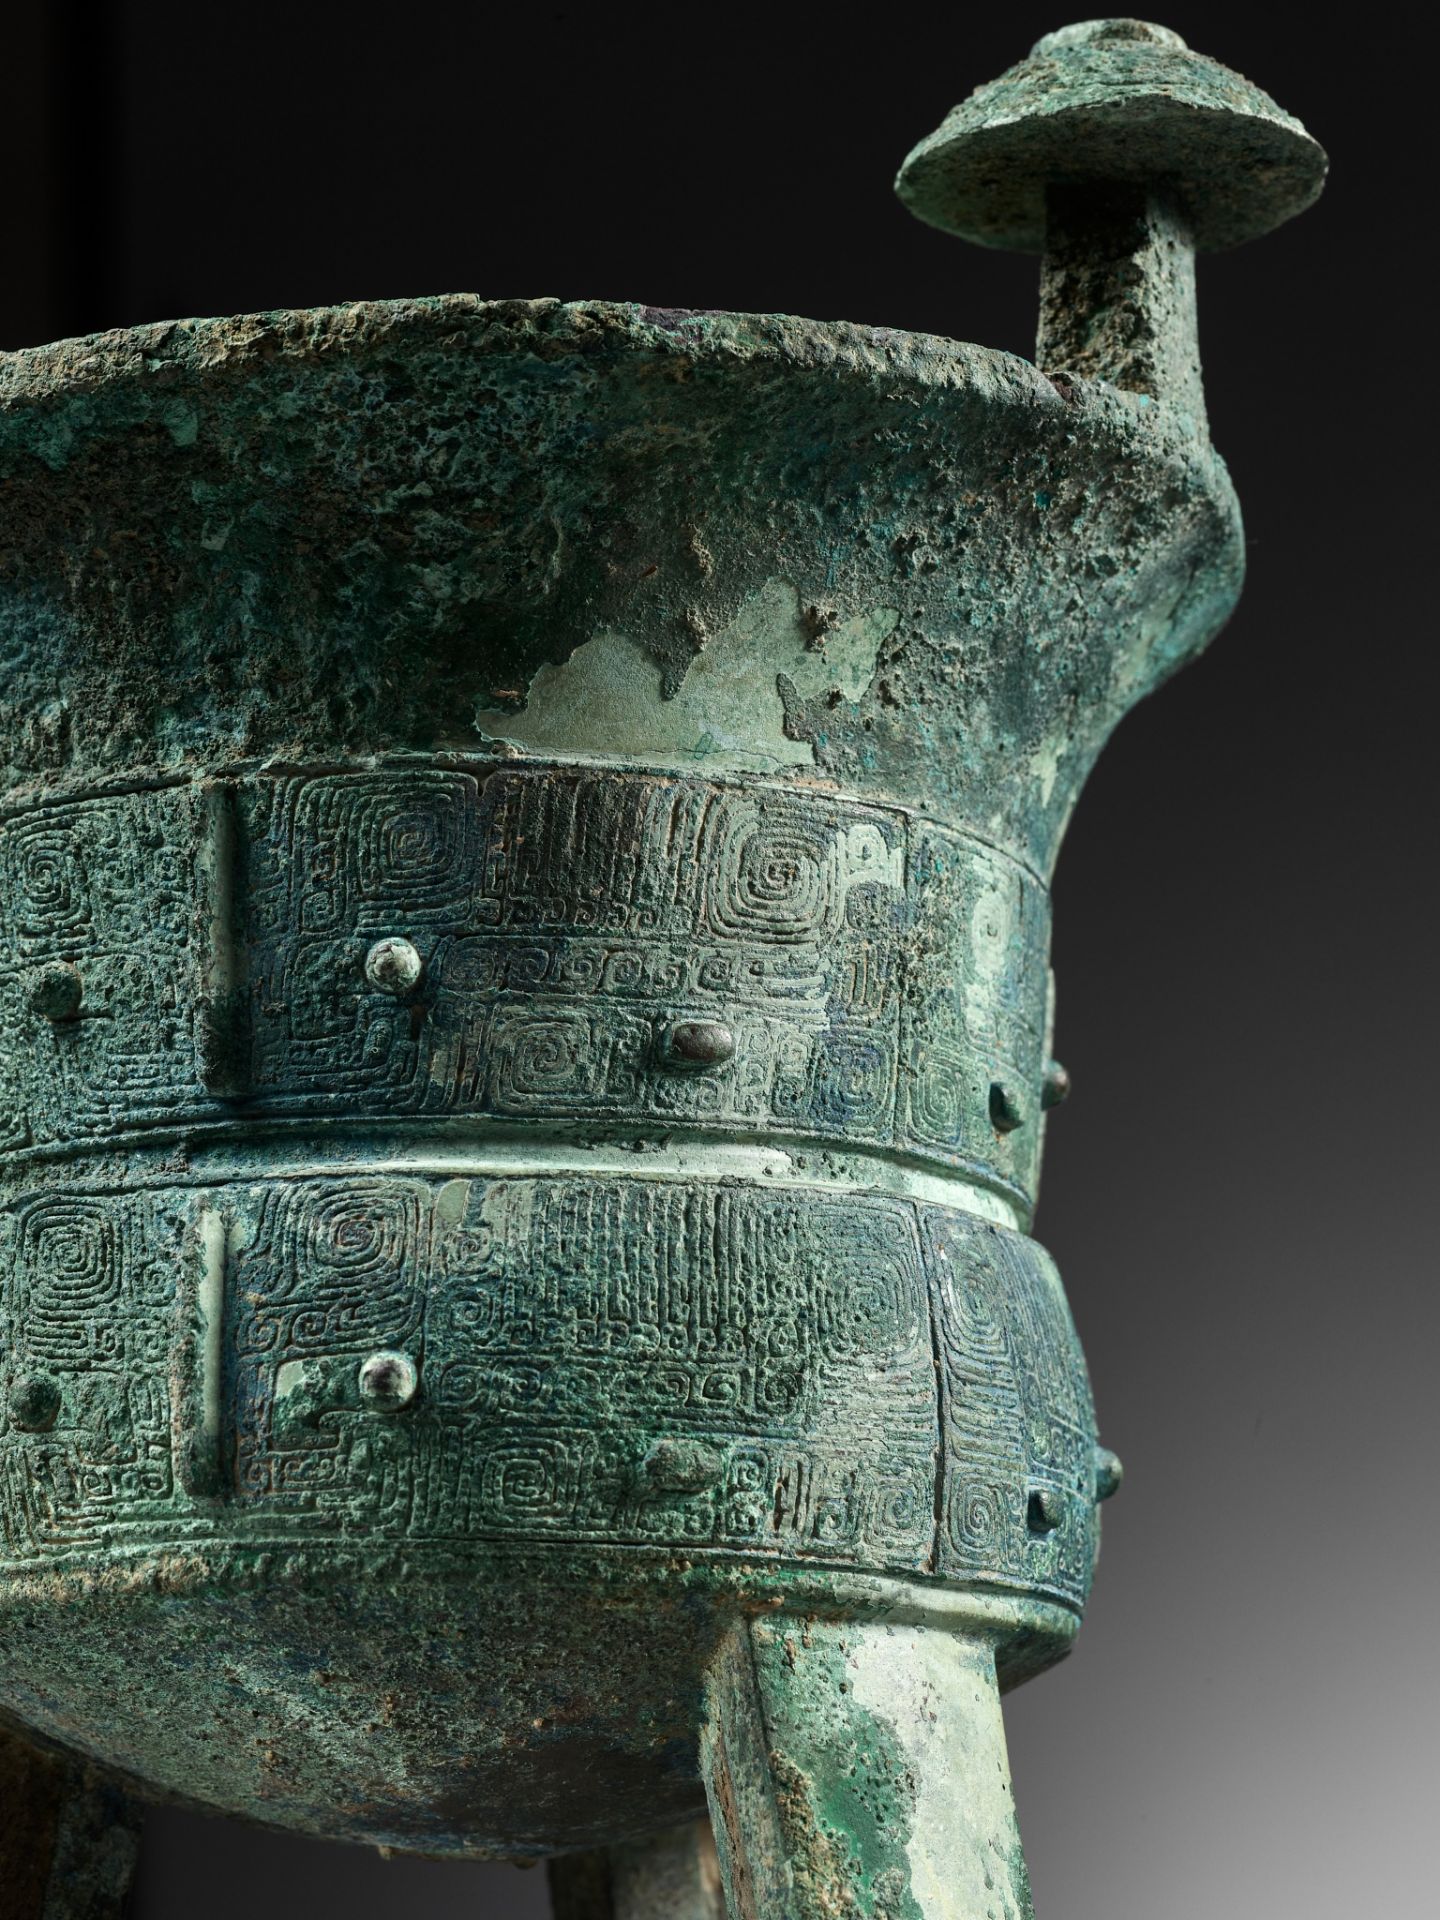 AN EXCEPTIONALLY LARGE AND MASSIVE BRONZE RITUAL TRIPOD WINE VESSEL, JIA, WITH A CLAN MARK, SHANG - Image 25 of 29